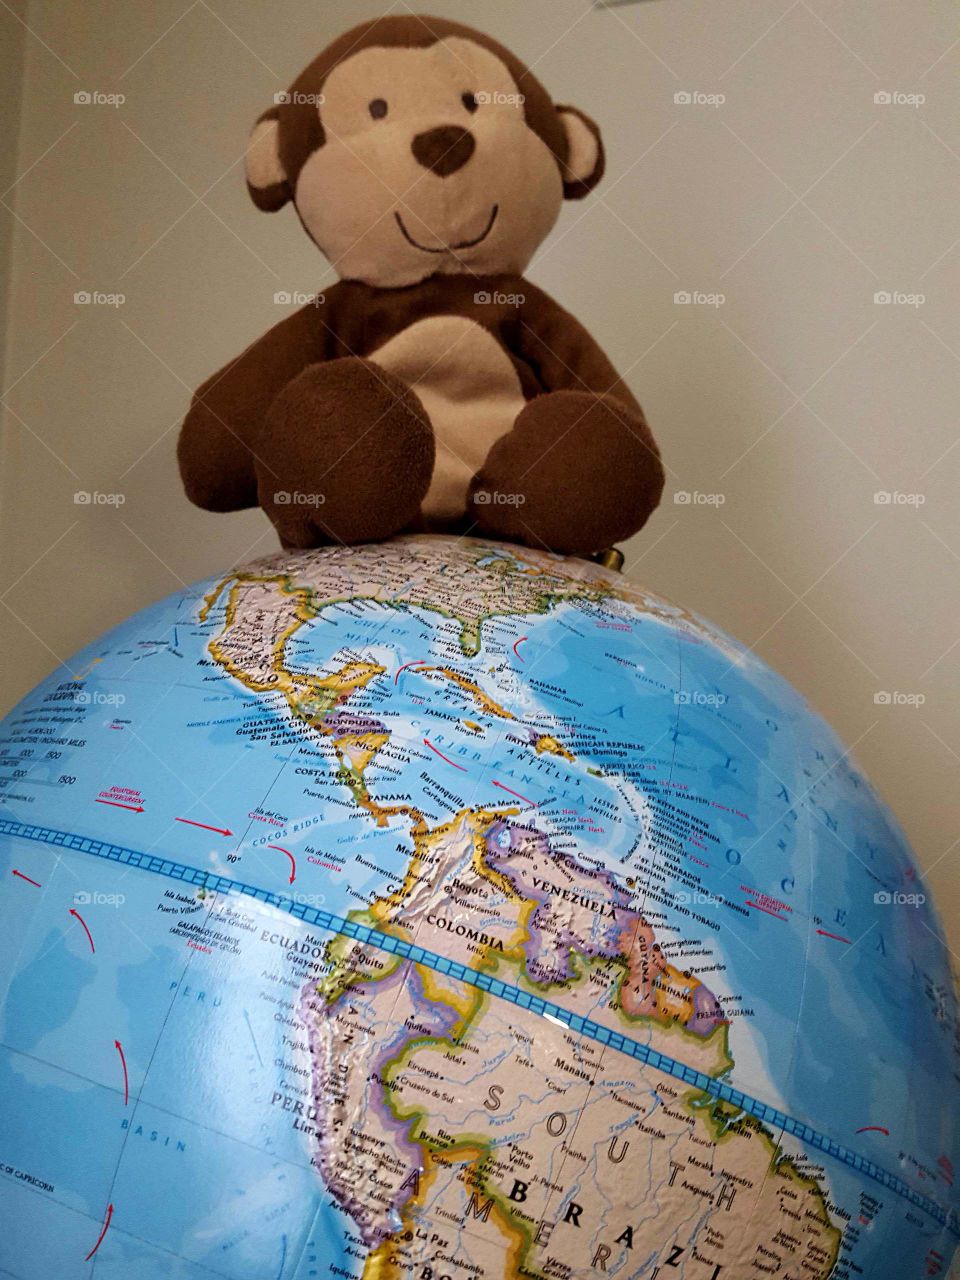 Monkey Sitting on Top of the World